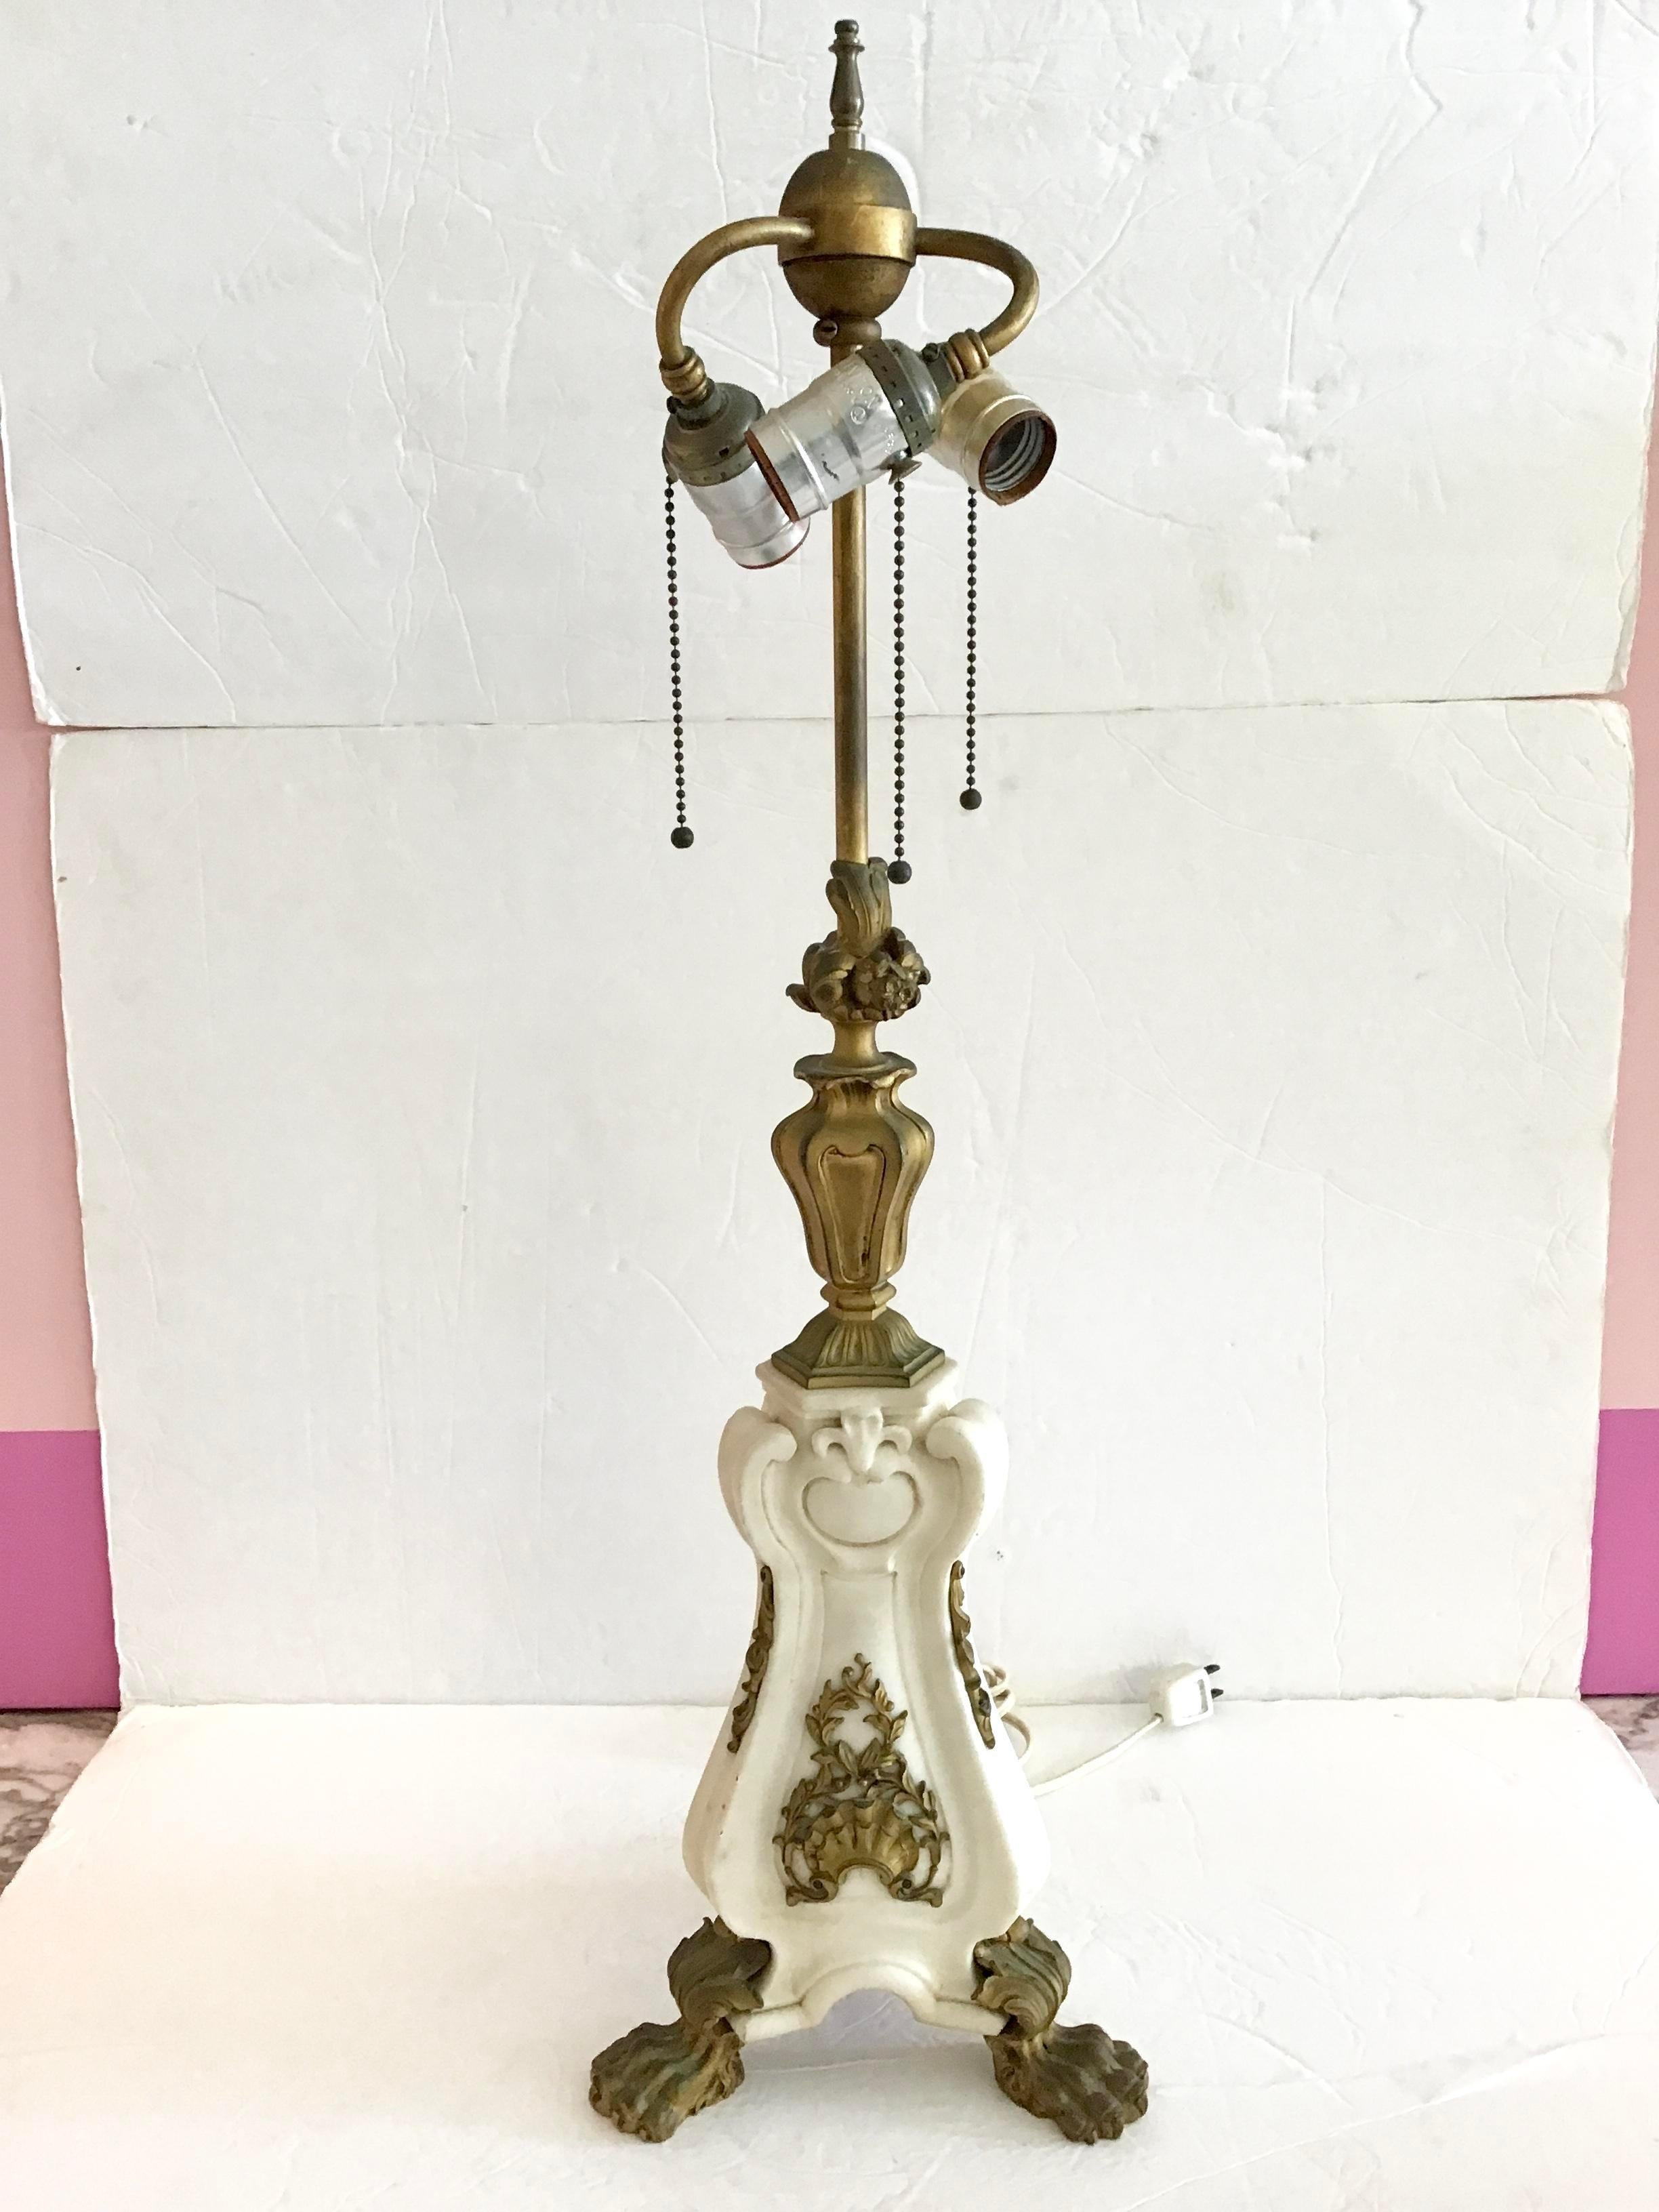 Fabulous French neoclassical table lamp with gilt bronze details on a hand carved marble form. Add some French Architecture to your home with beautiful neoclassical shape.